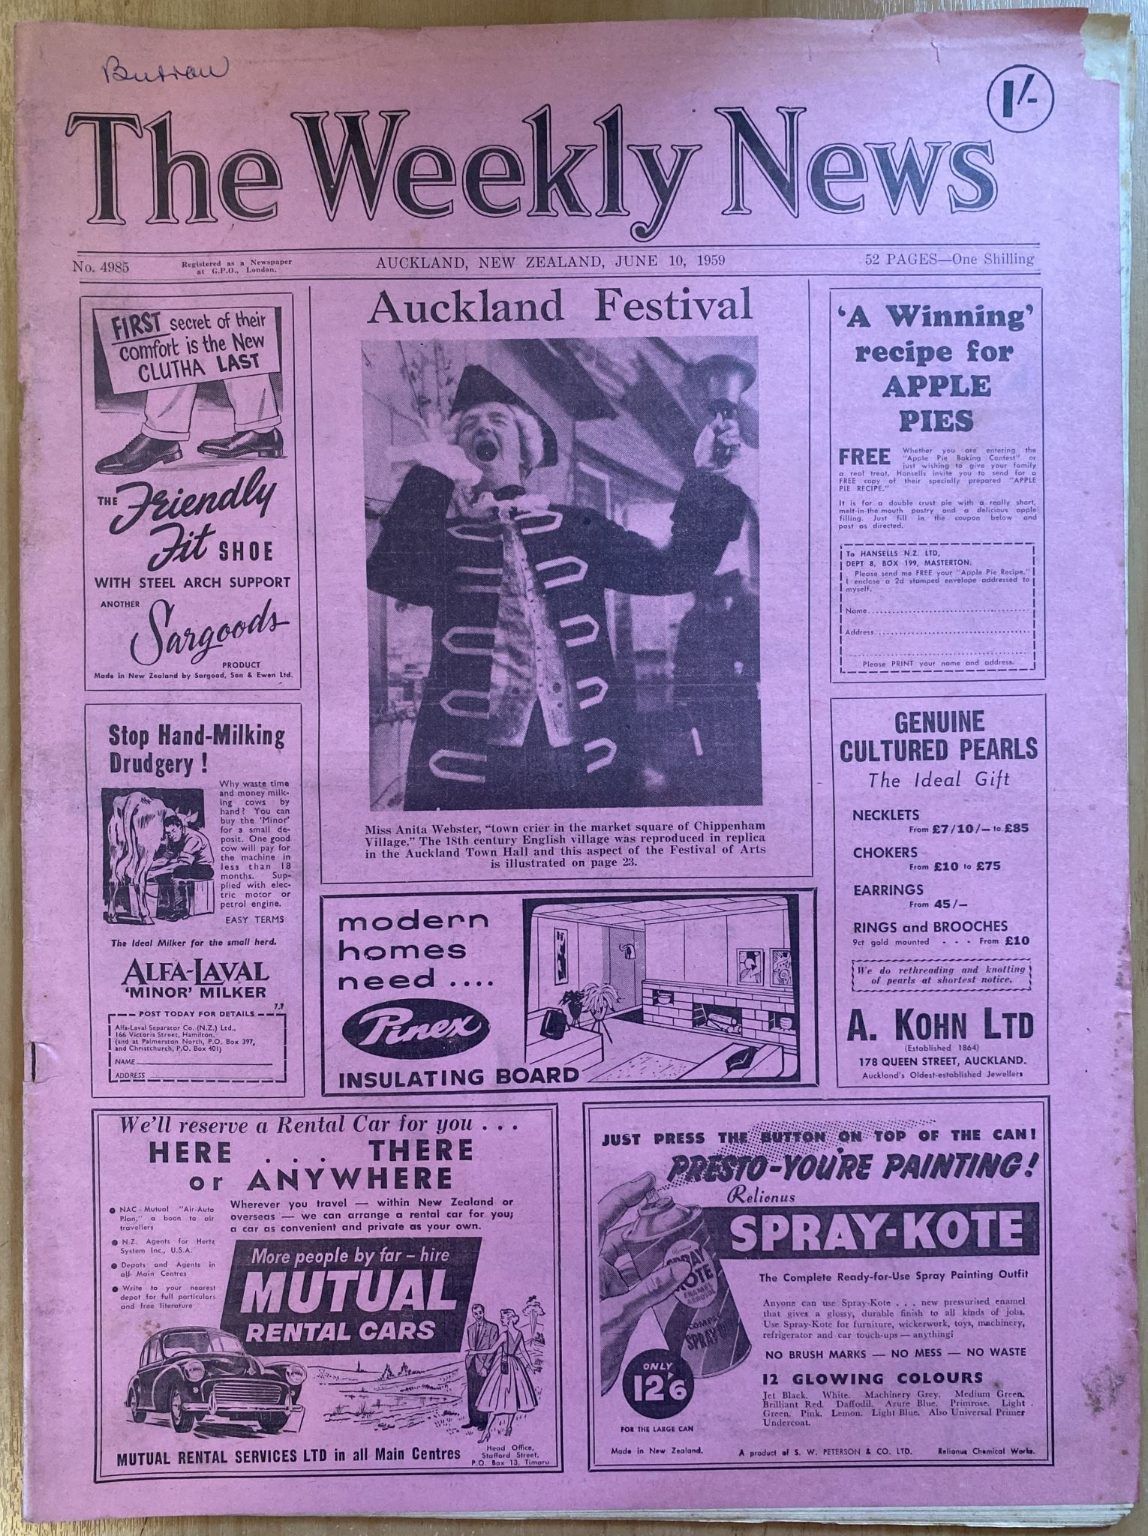 OLD NEWSPAPER: The Weekly News - No. 4985, 10 June 1959